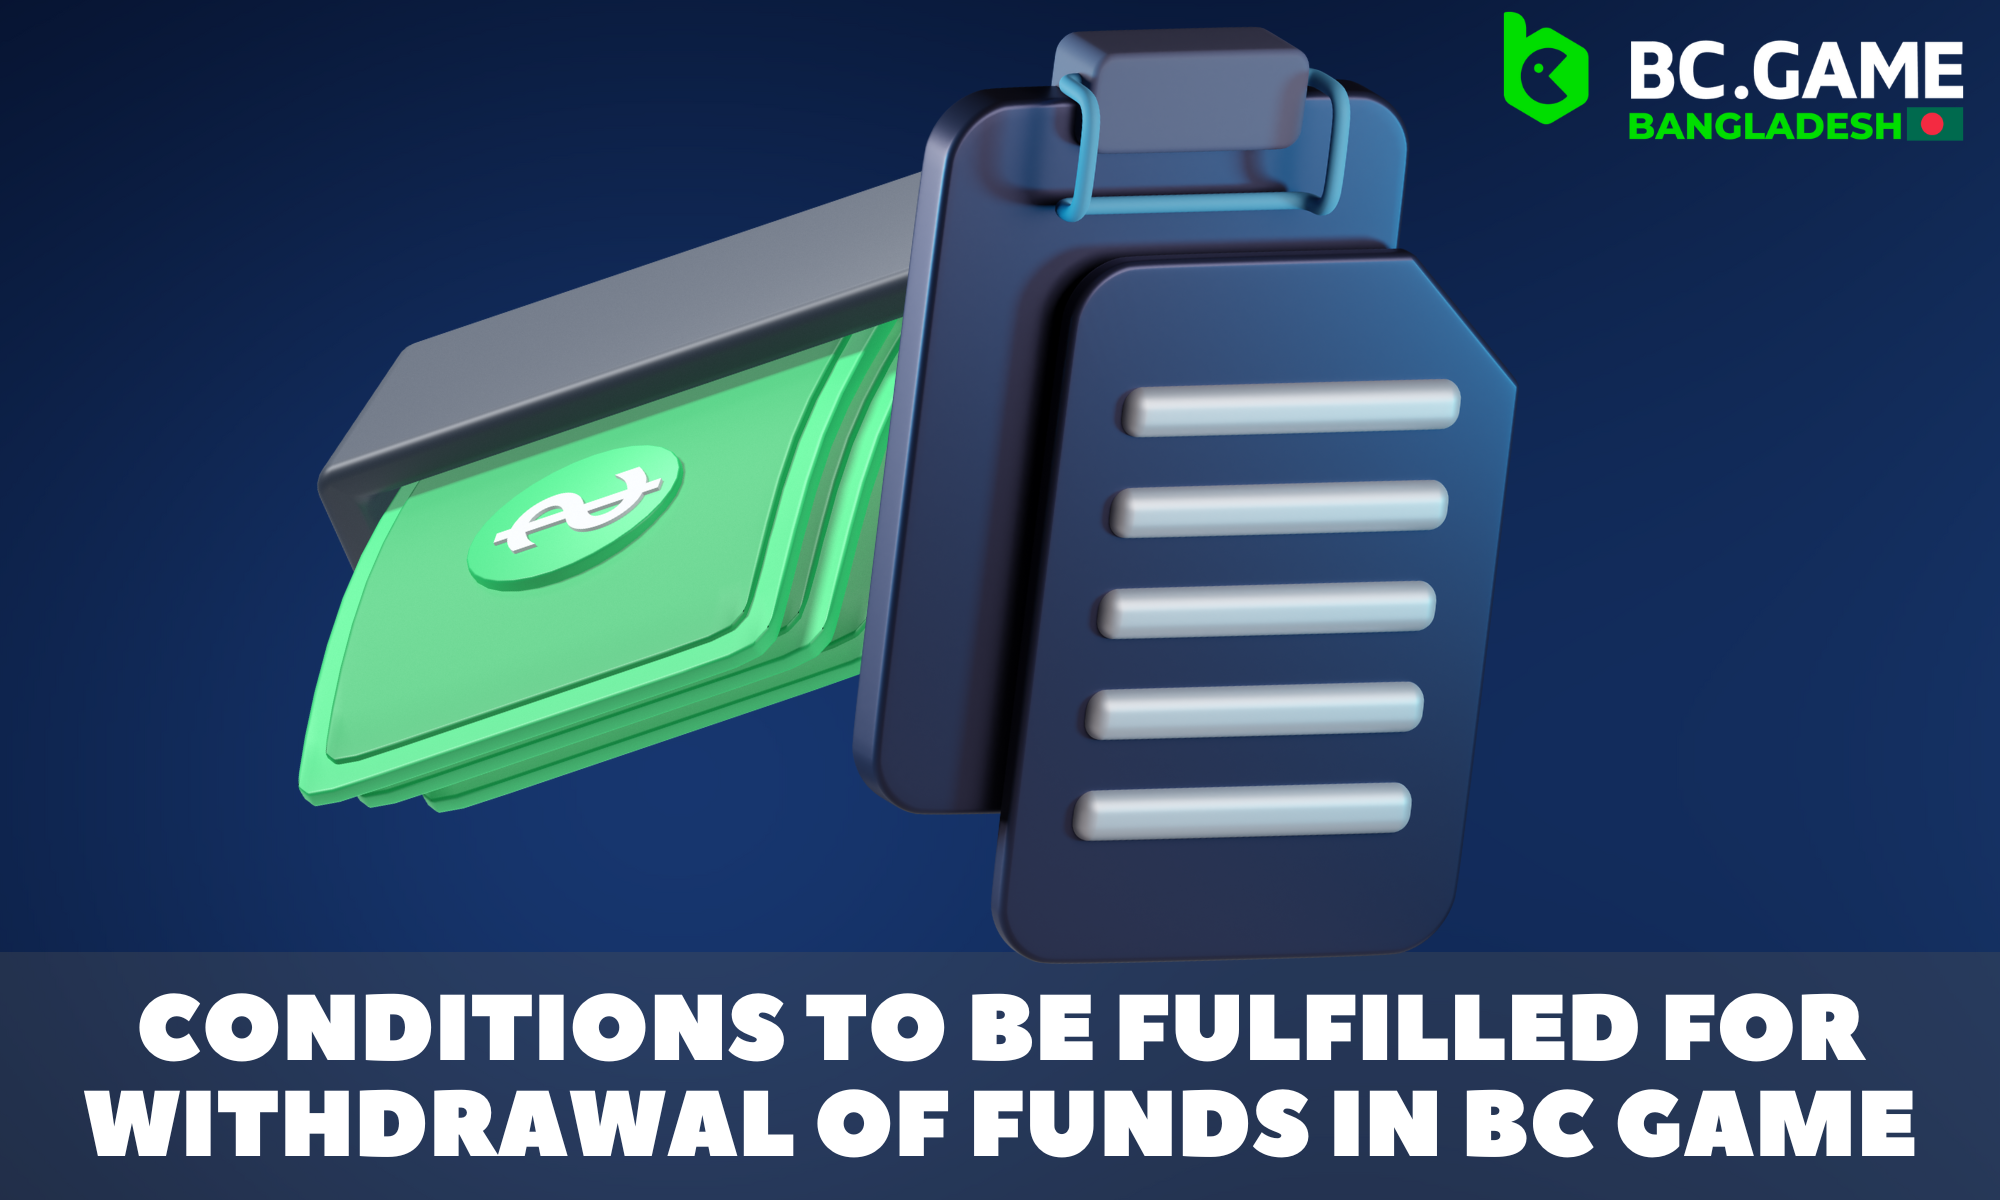 To start withdrawing funds, you need to meet certain conditions of BC Game